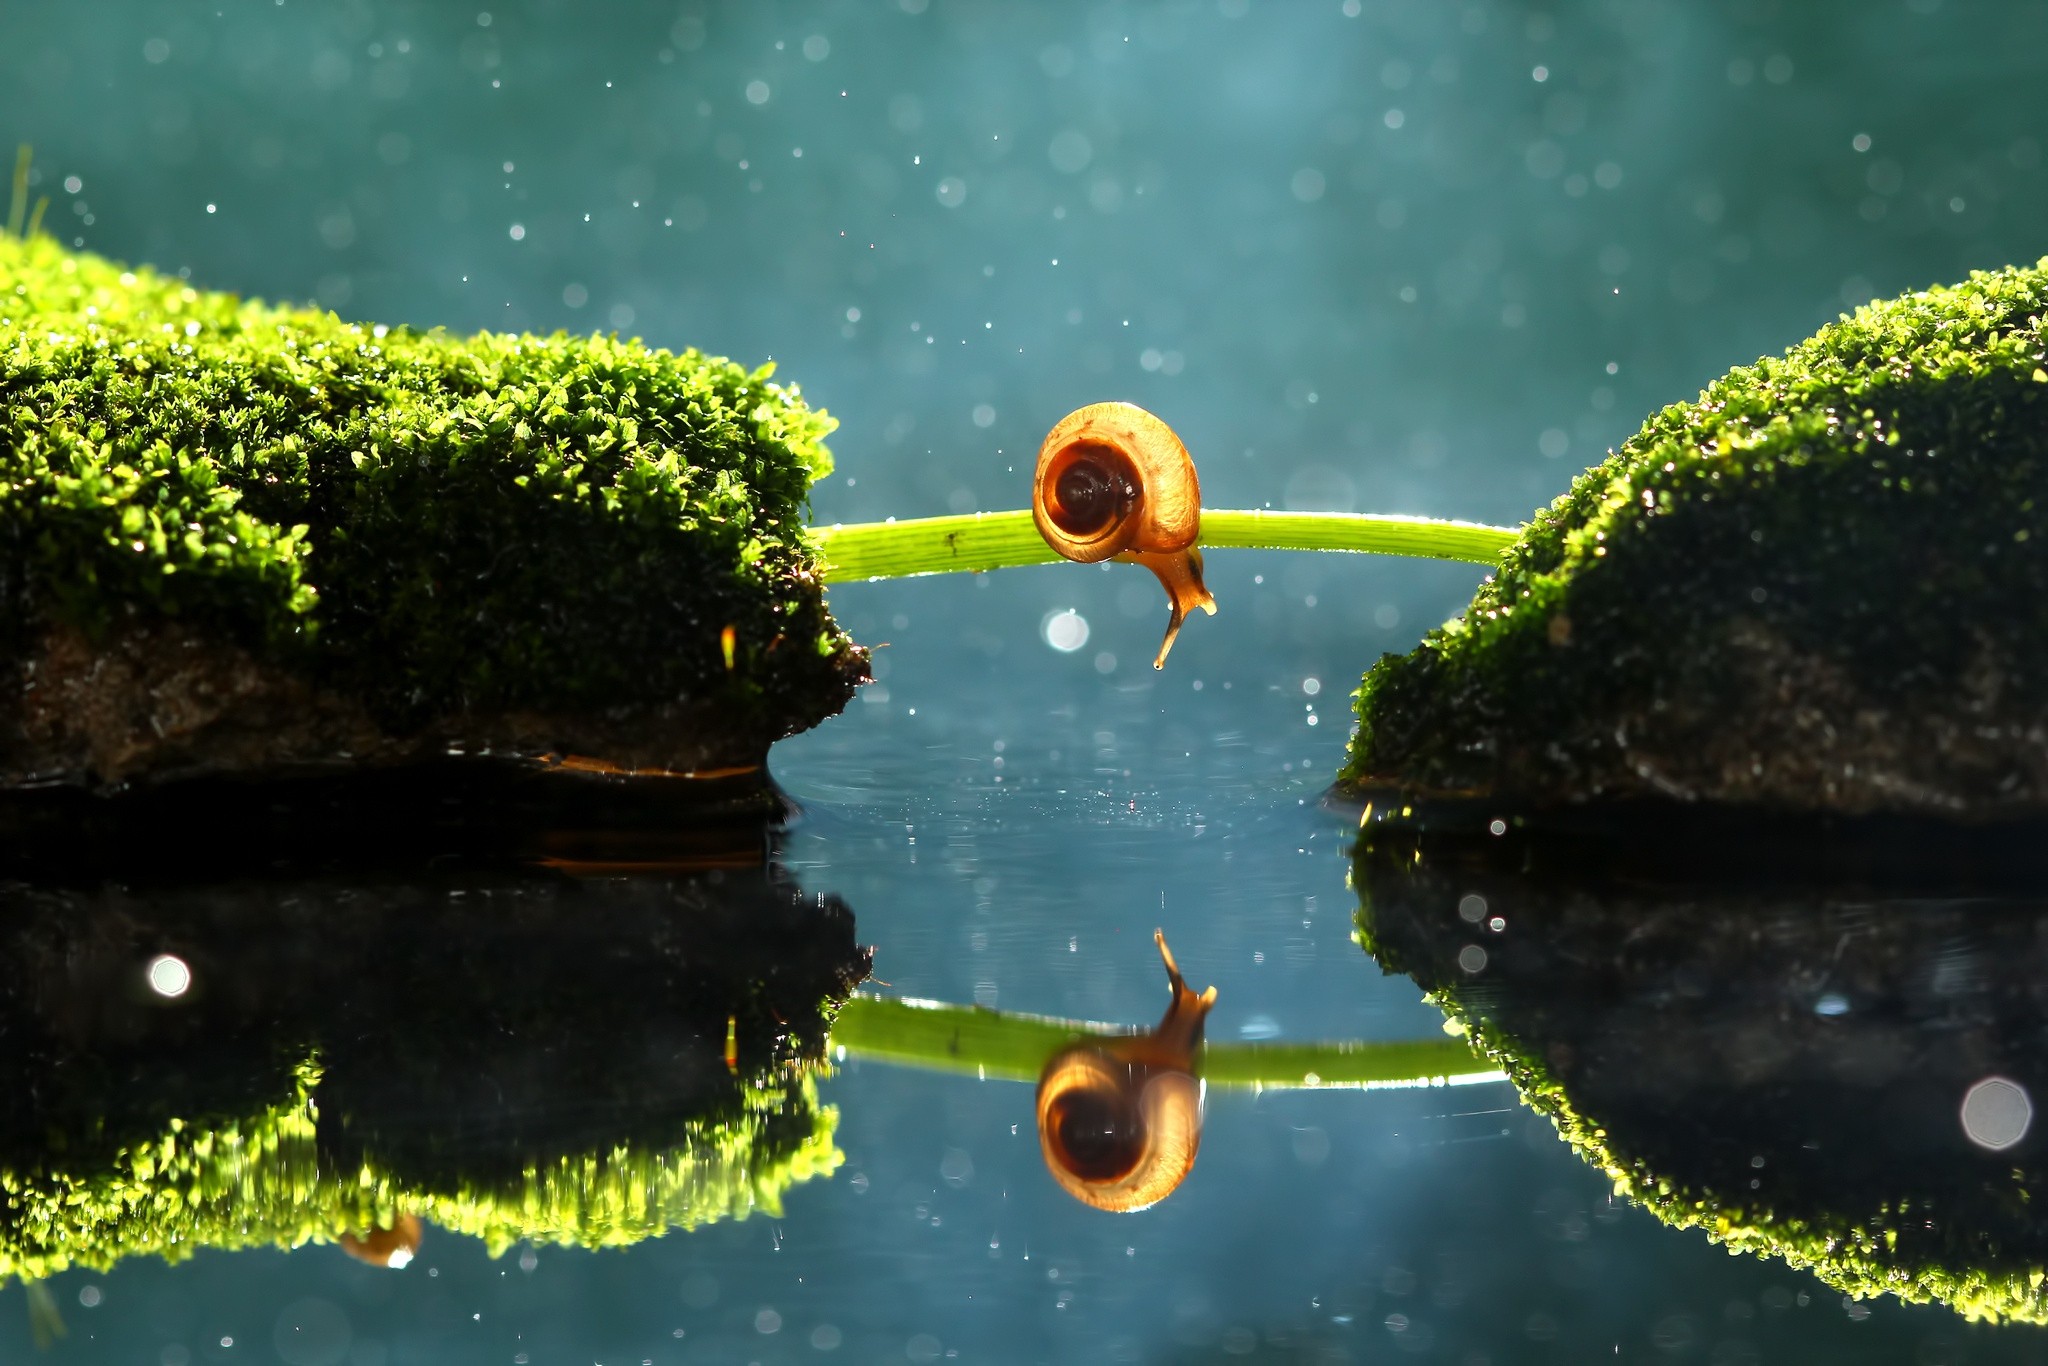 photography, Macro, Depth of field, Insect, Nature, Snail, Reflection, Moss, Alone Wallpaper